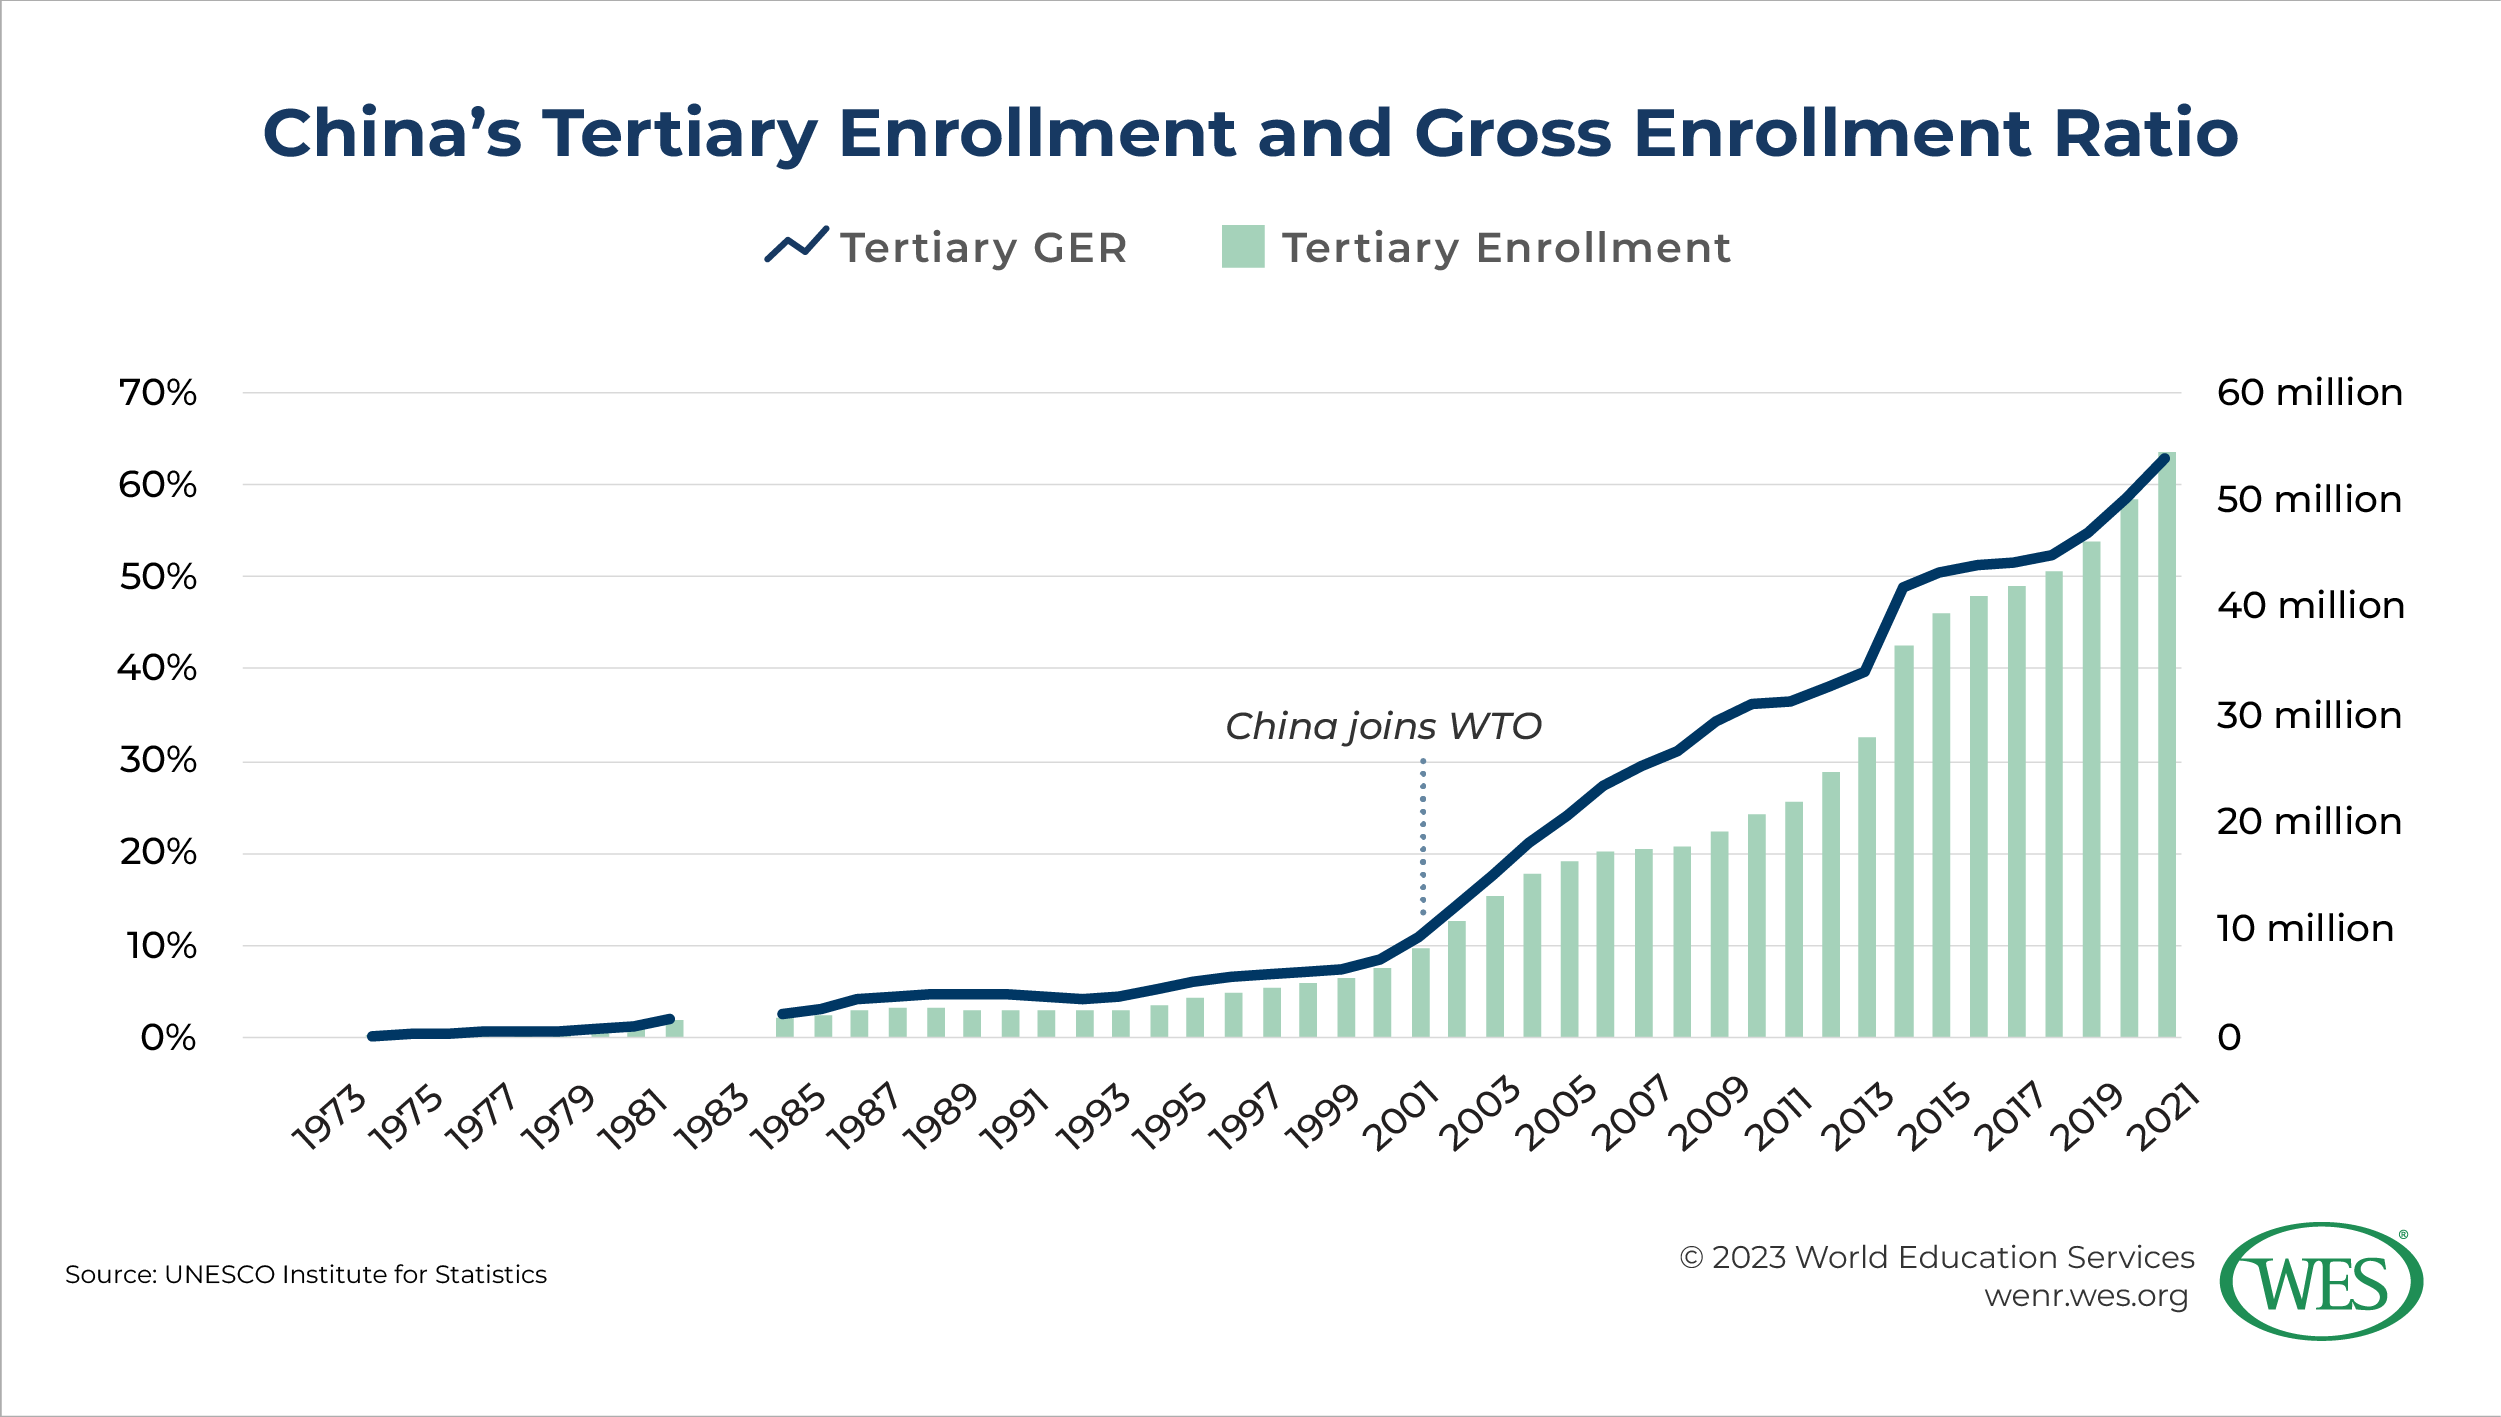 A chart showing China's tertiary enrollment and gross enrollment ratio between 1973 and 2021. 